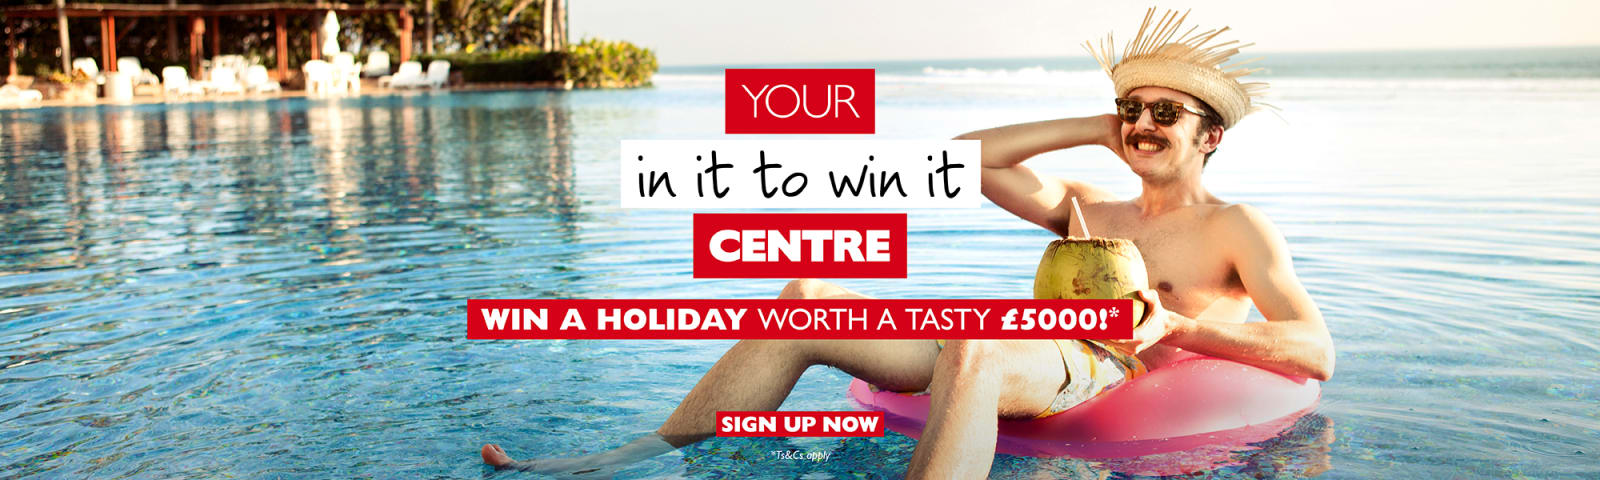 Your in it to win it centre | win a holiday worth a tasty £5,000*. Sign up now